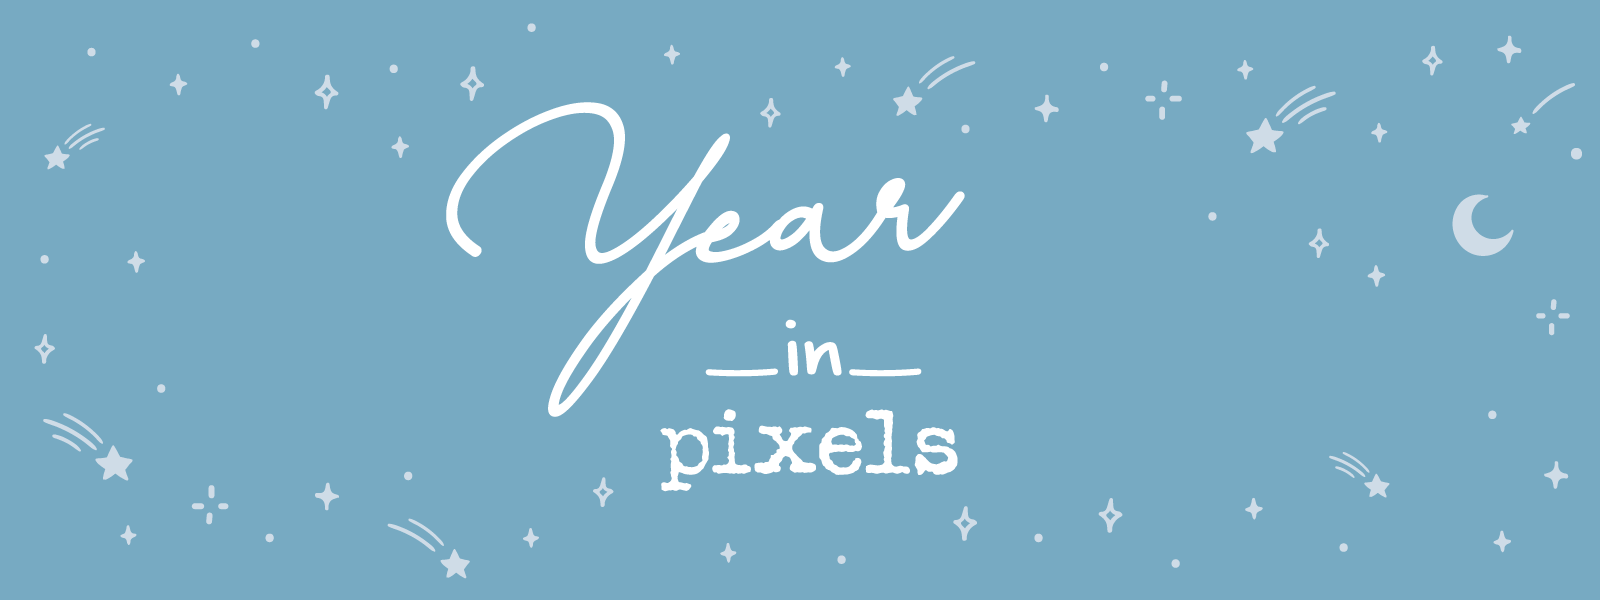 My Year in Pixels Free Bullet Journal Printable – NotebookTherapy